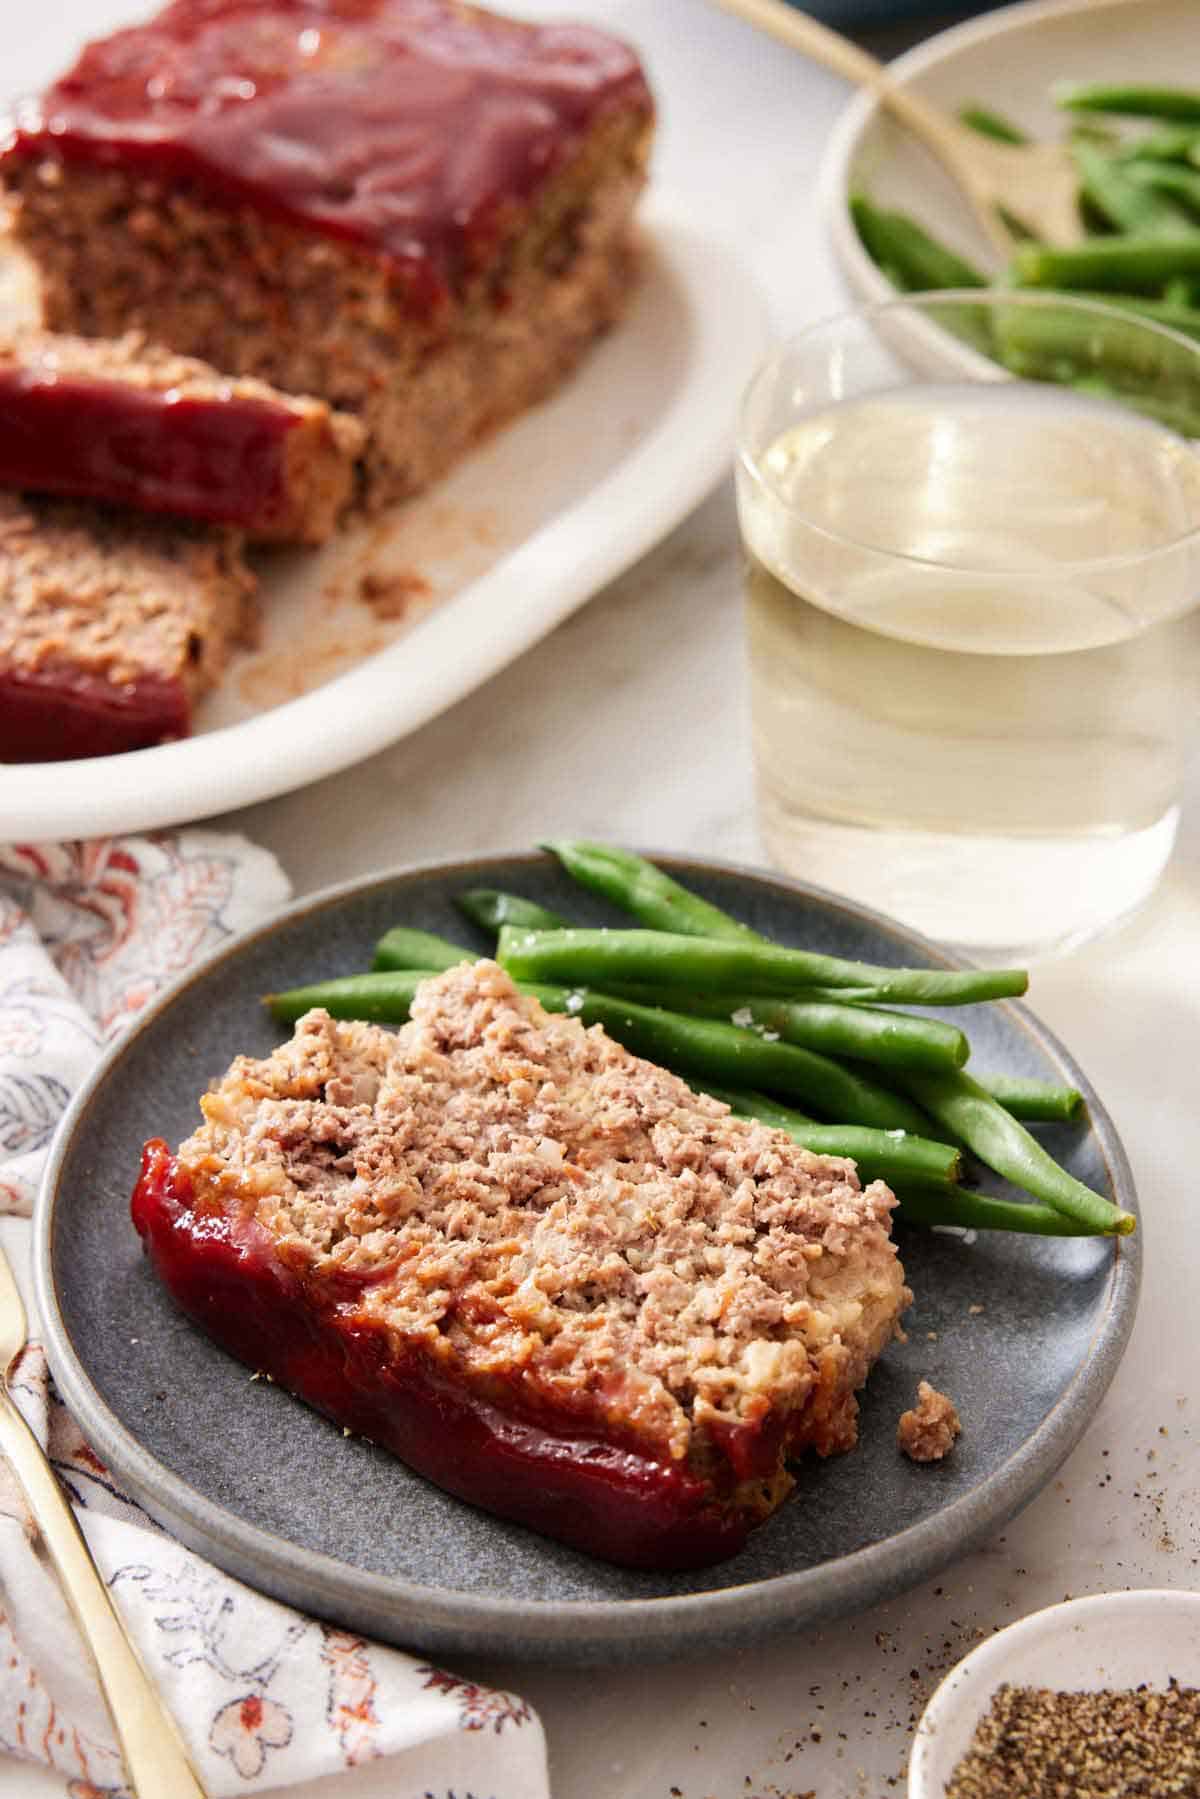 A slice of meatloaf with green beans on a plate with a glass of wine and the rest of the meatloaf in the background.